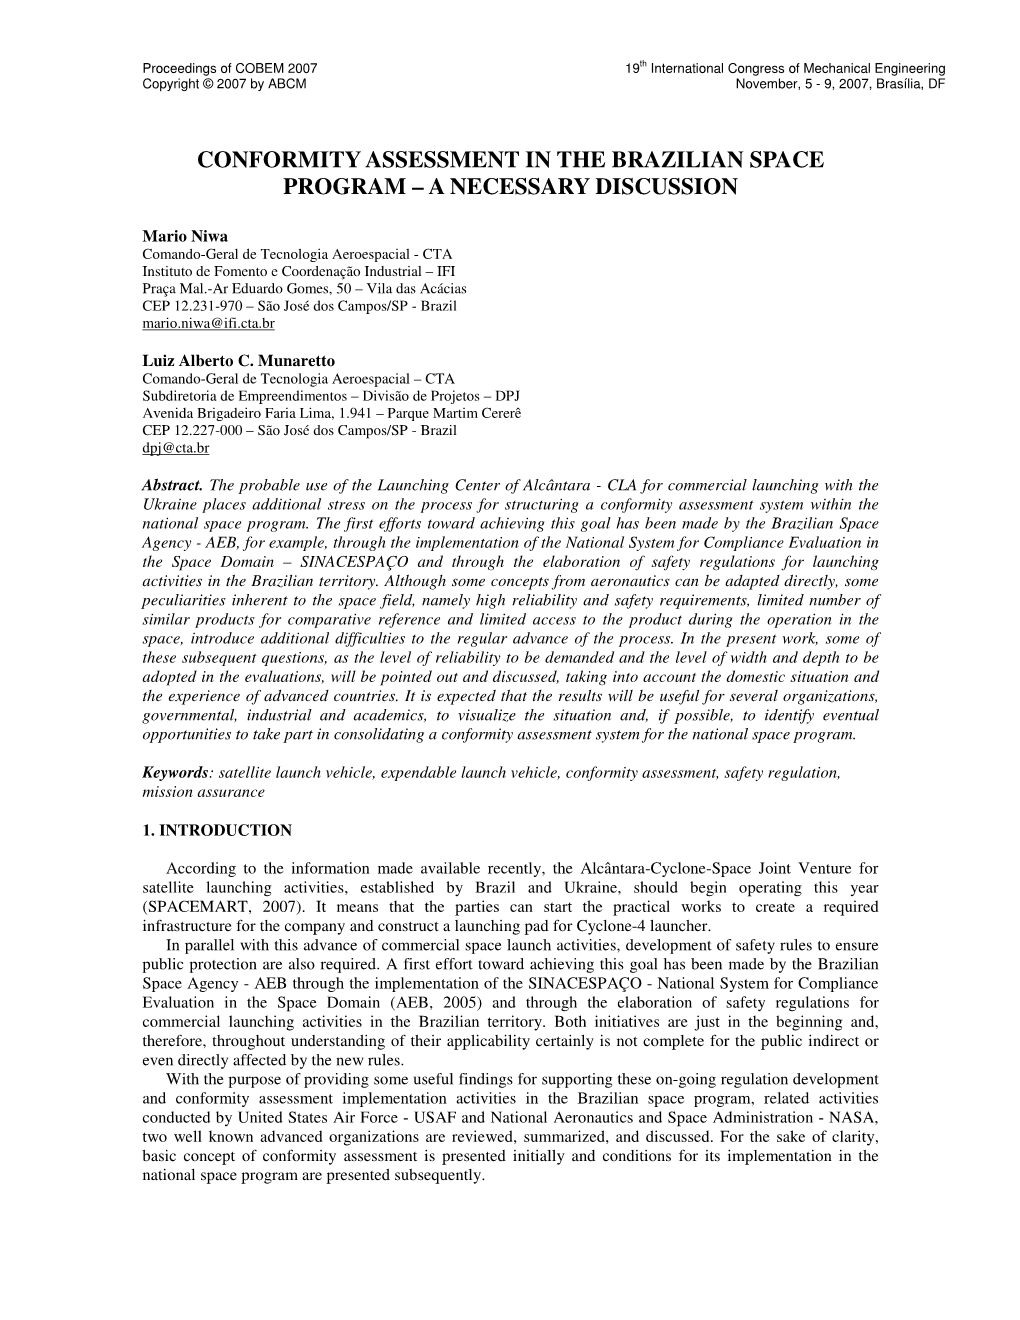 Conformity Assessment in the Brazilian Space Program – a Necessary Discussion